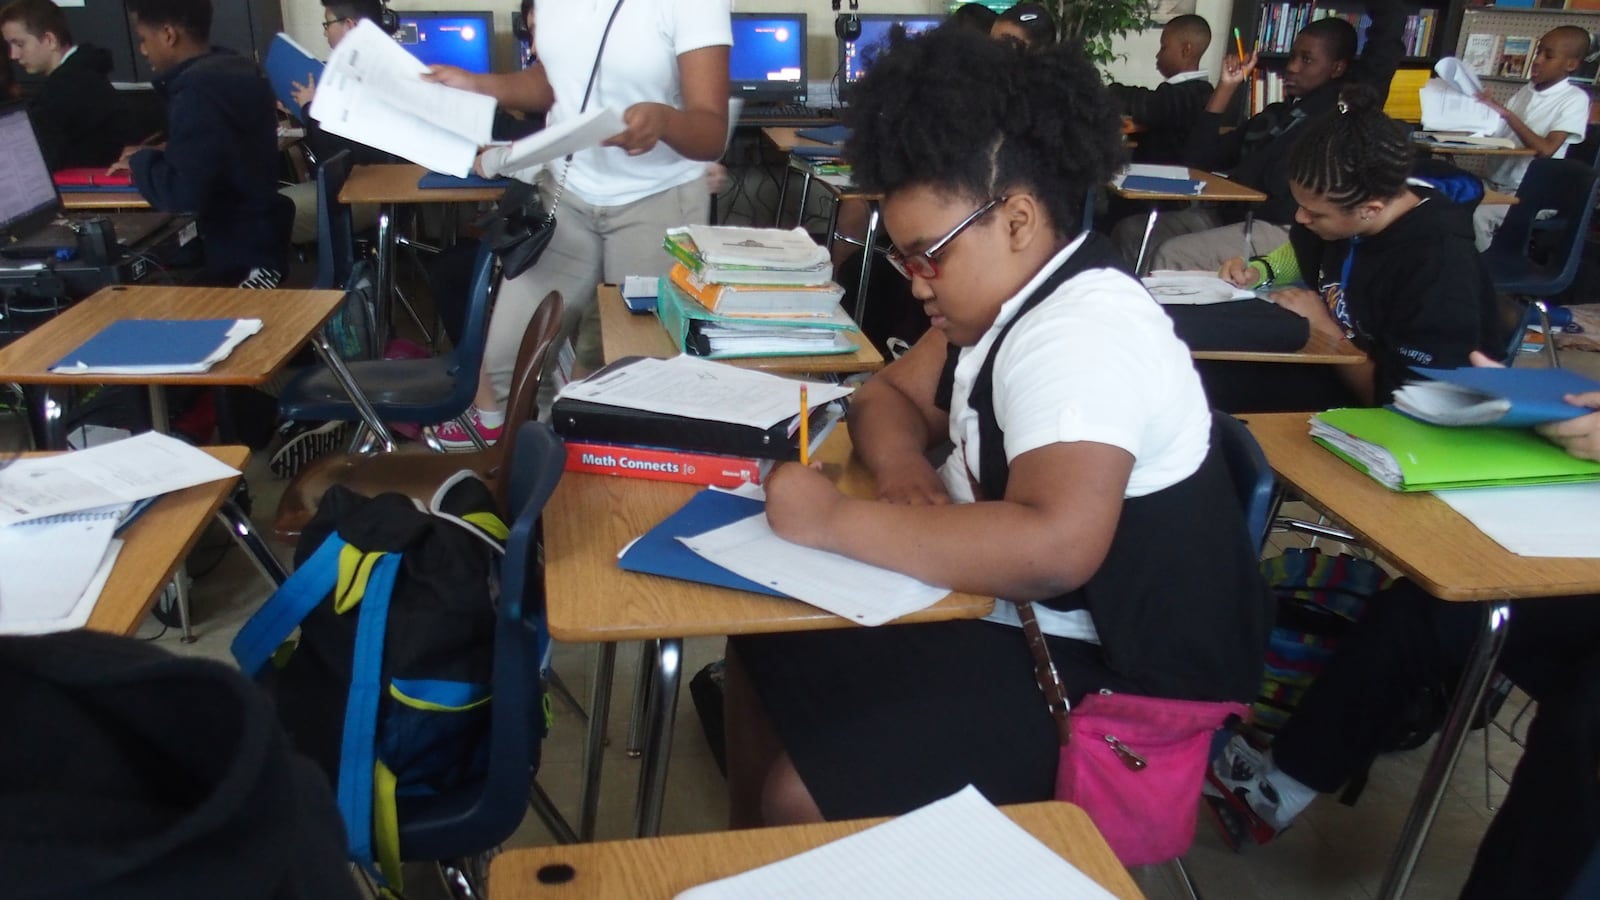 A student prepares for an exam at Treadwell Middle School in Memphis.